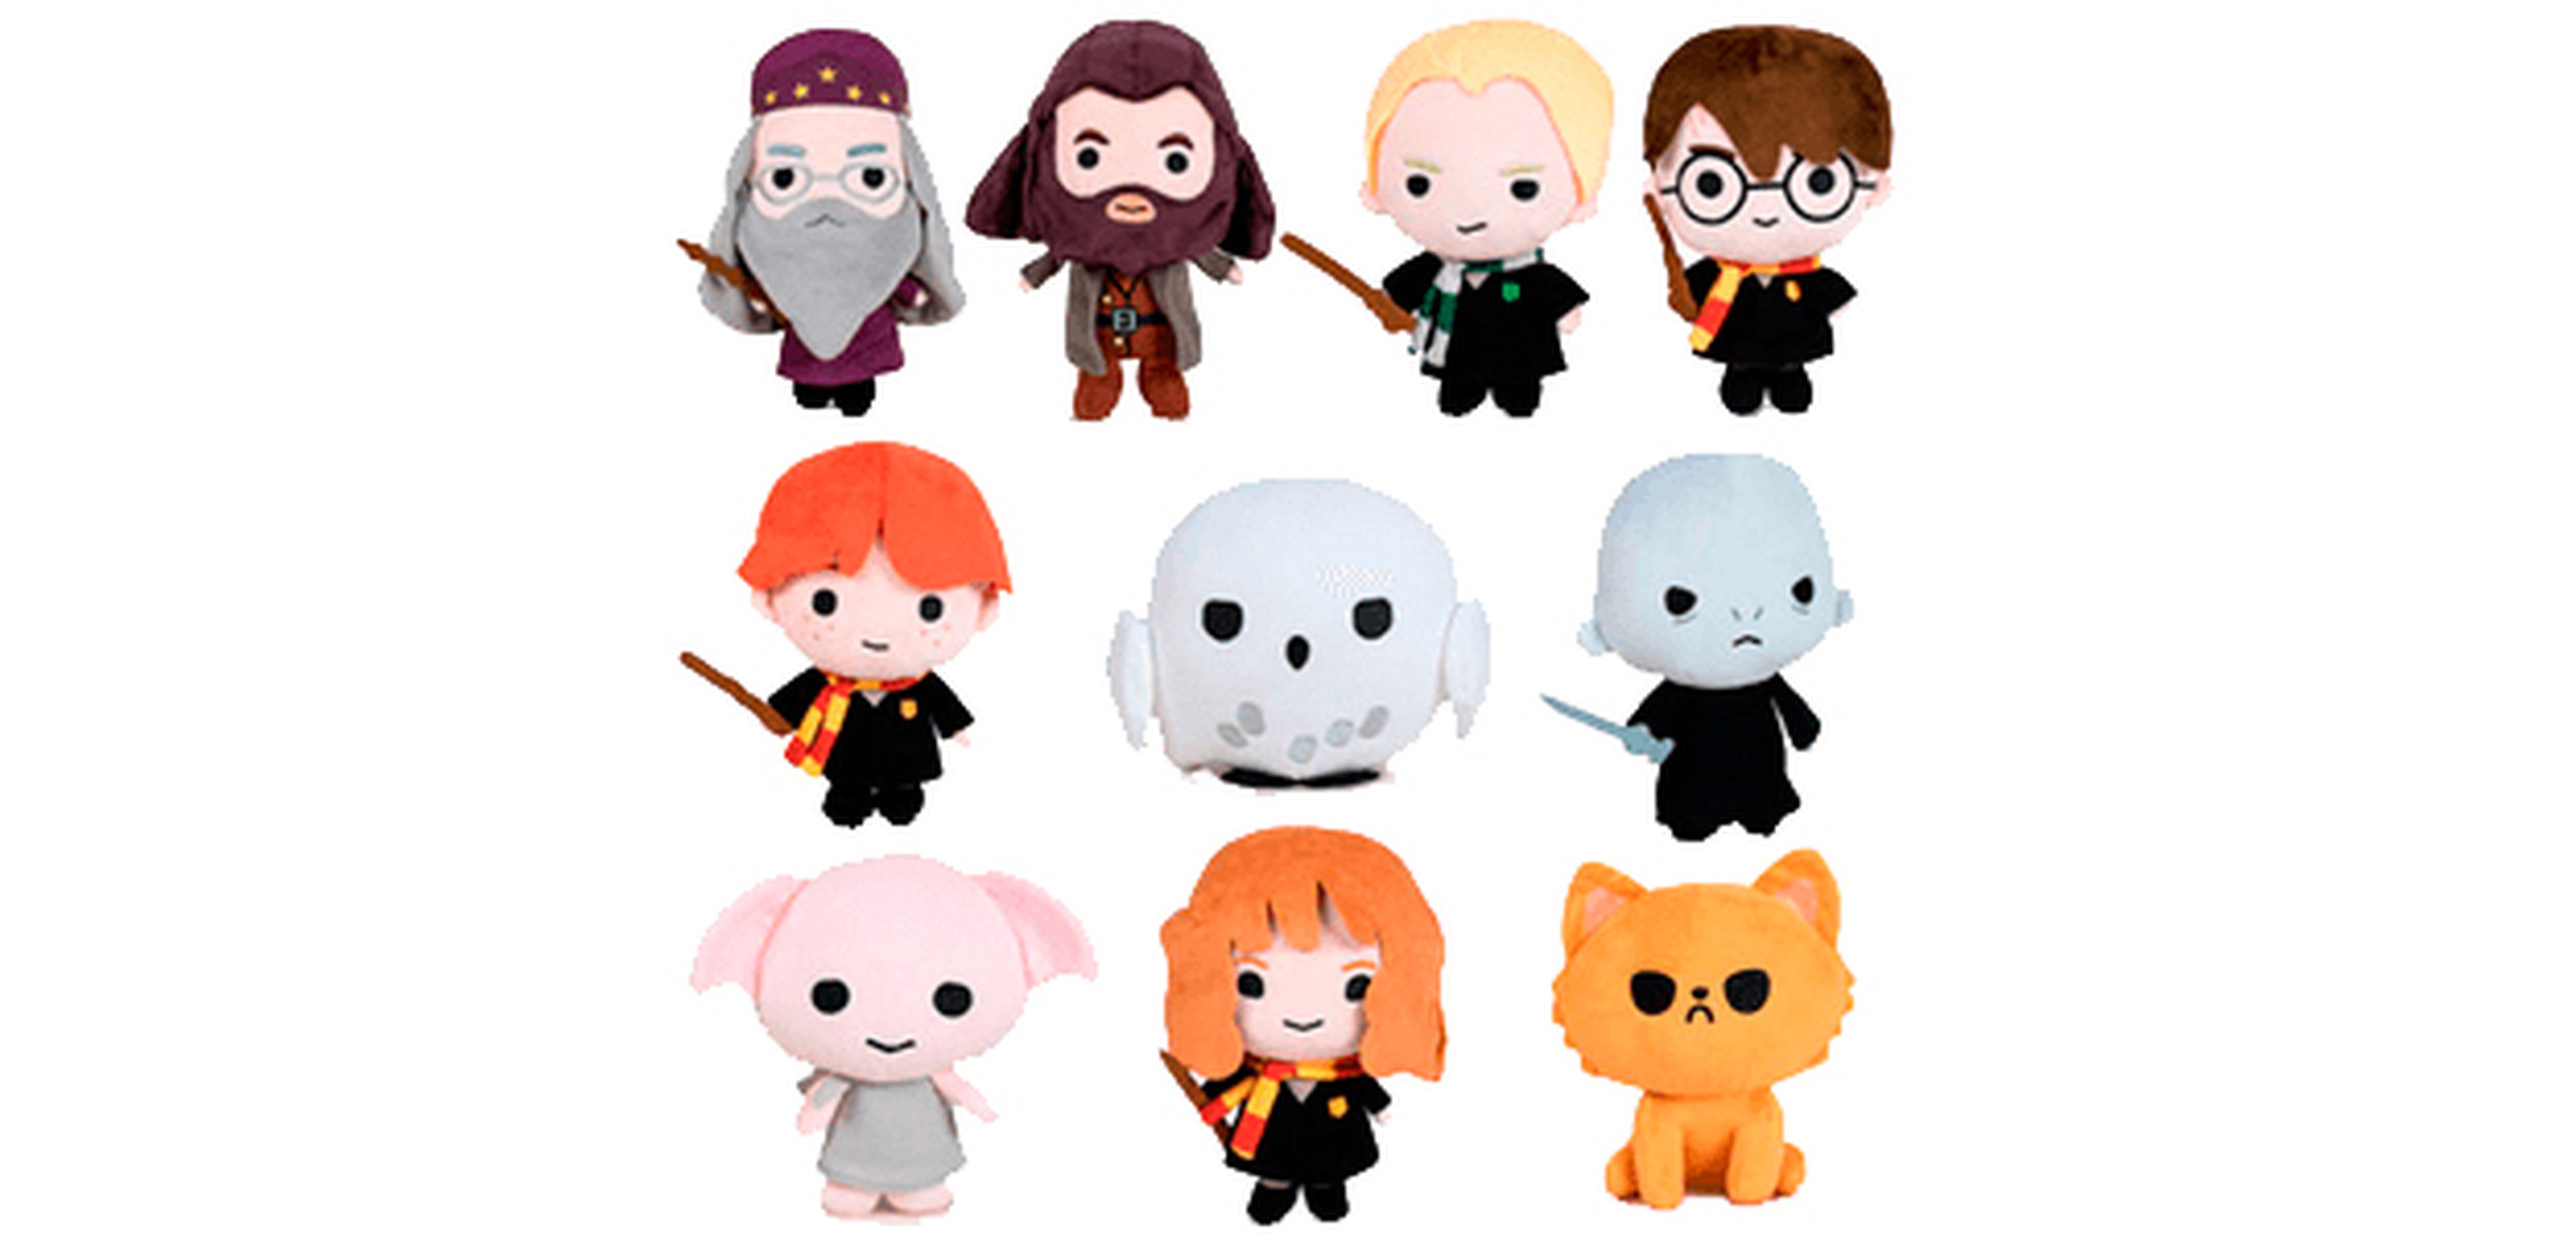 Peluches especial Harry Potter GAME